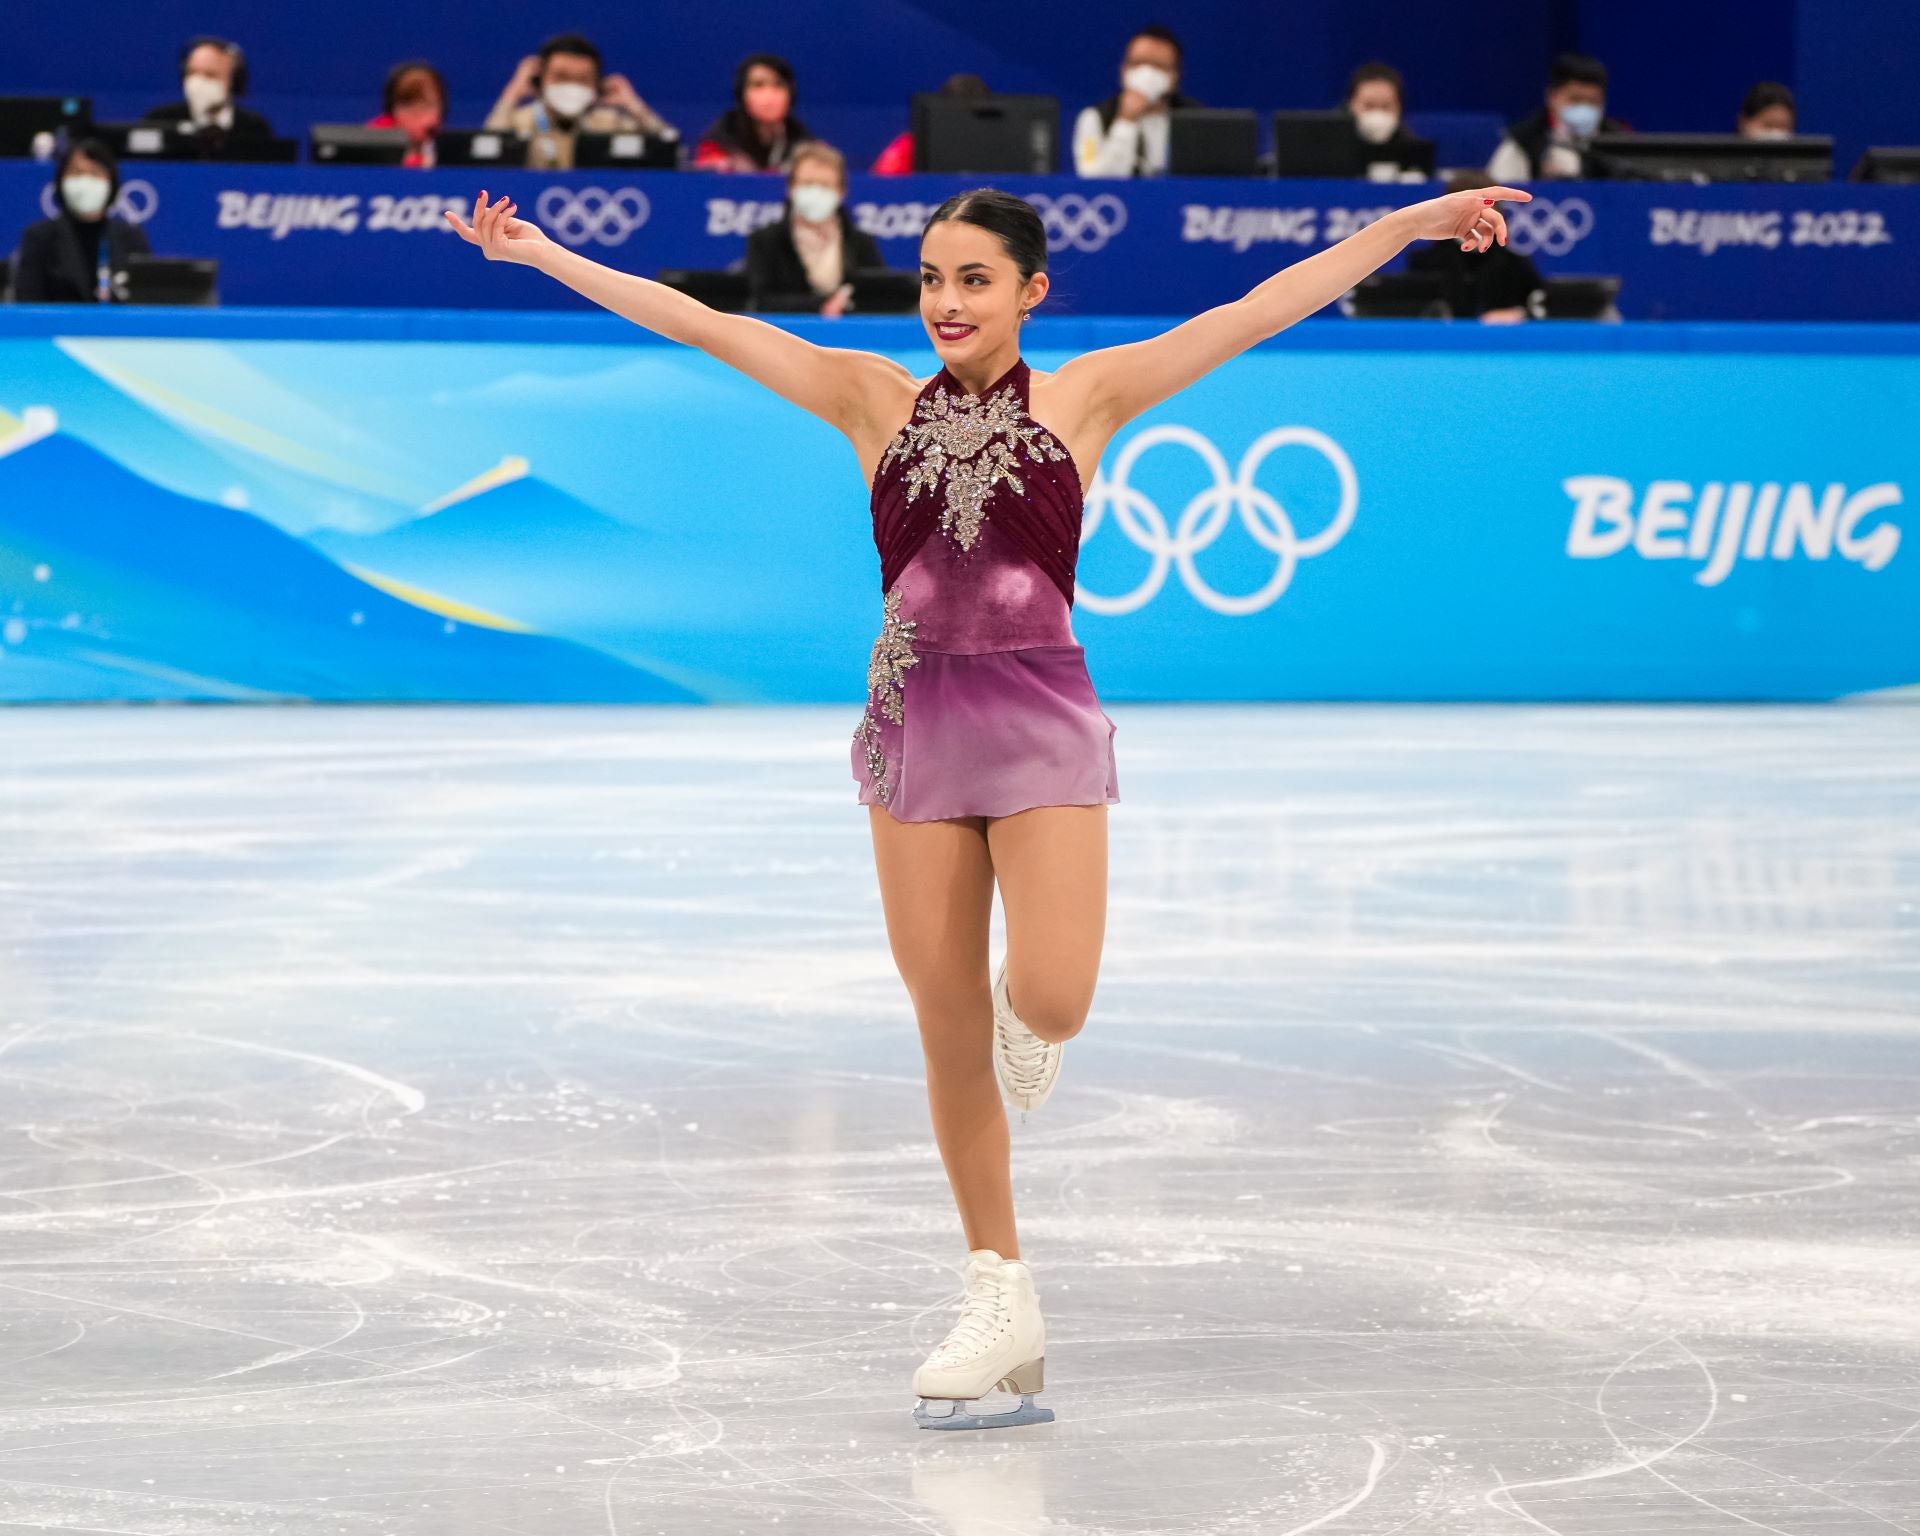 Madeline Schizas skating at the Beijing 2022 Winter Olympics